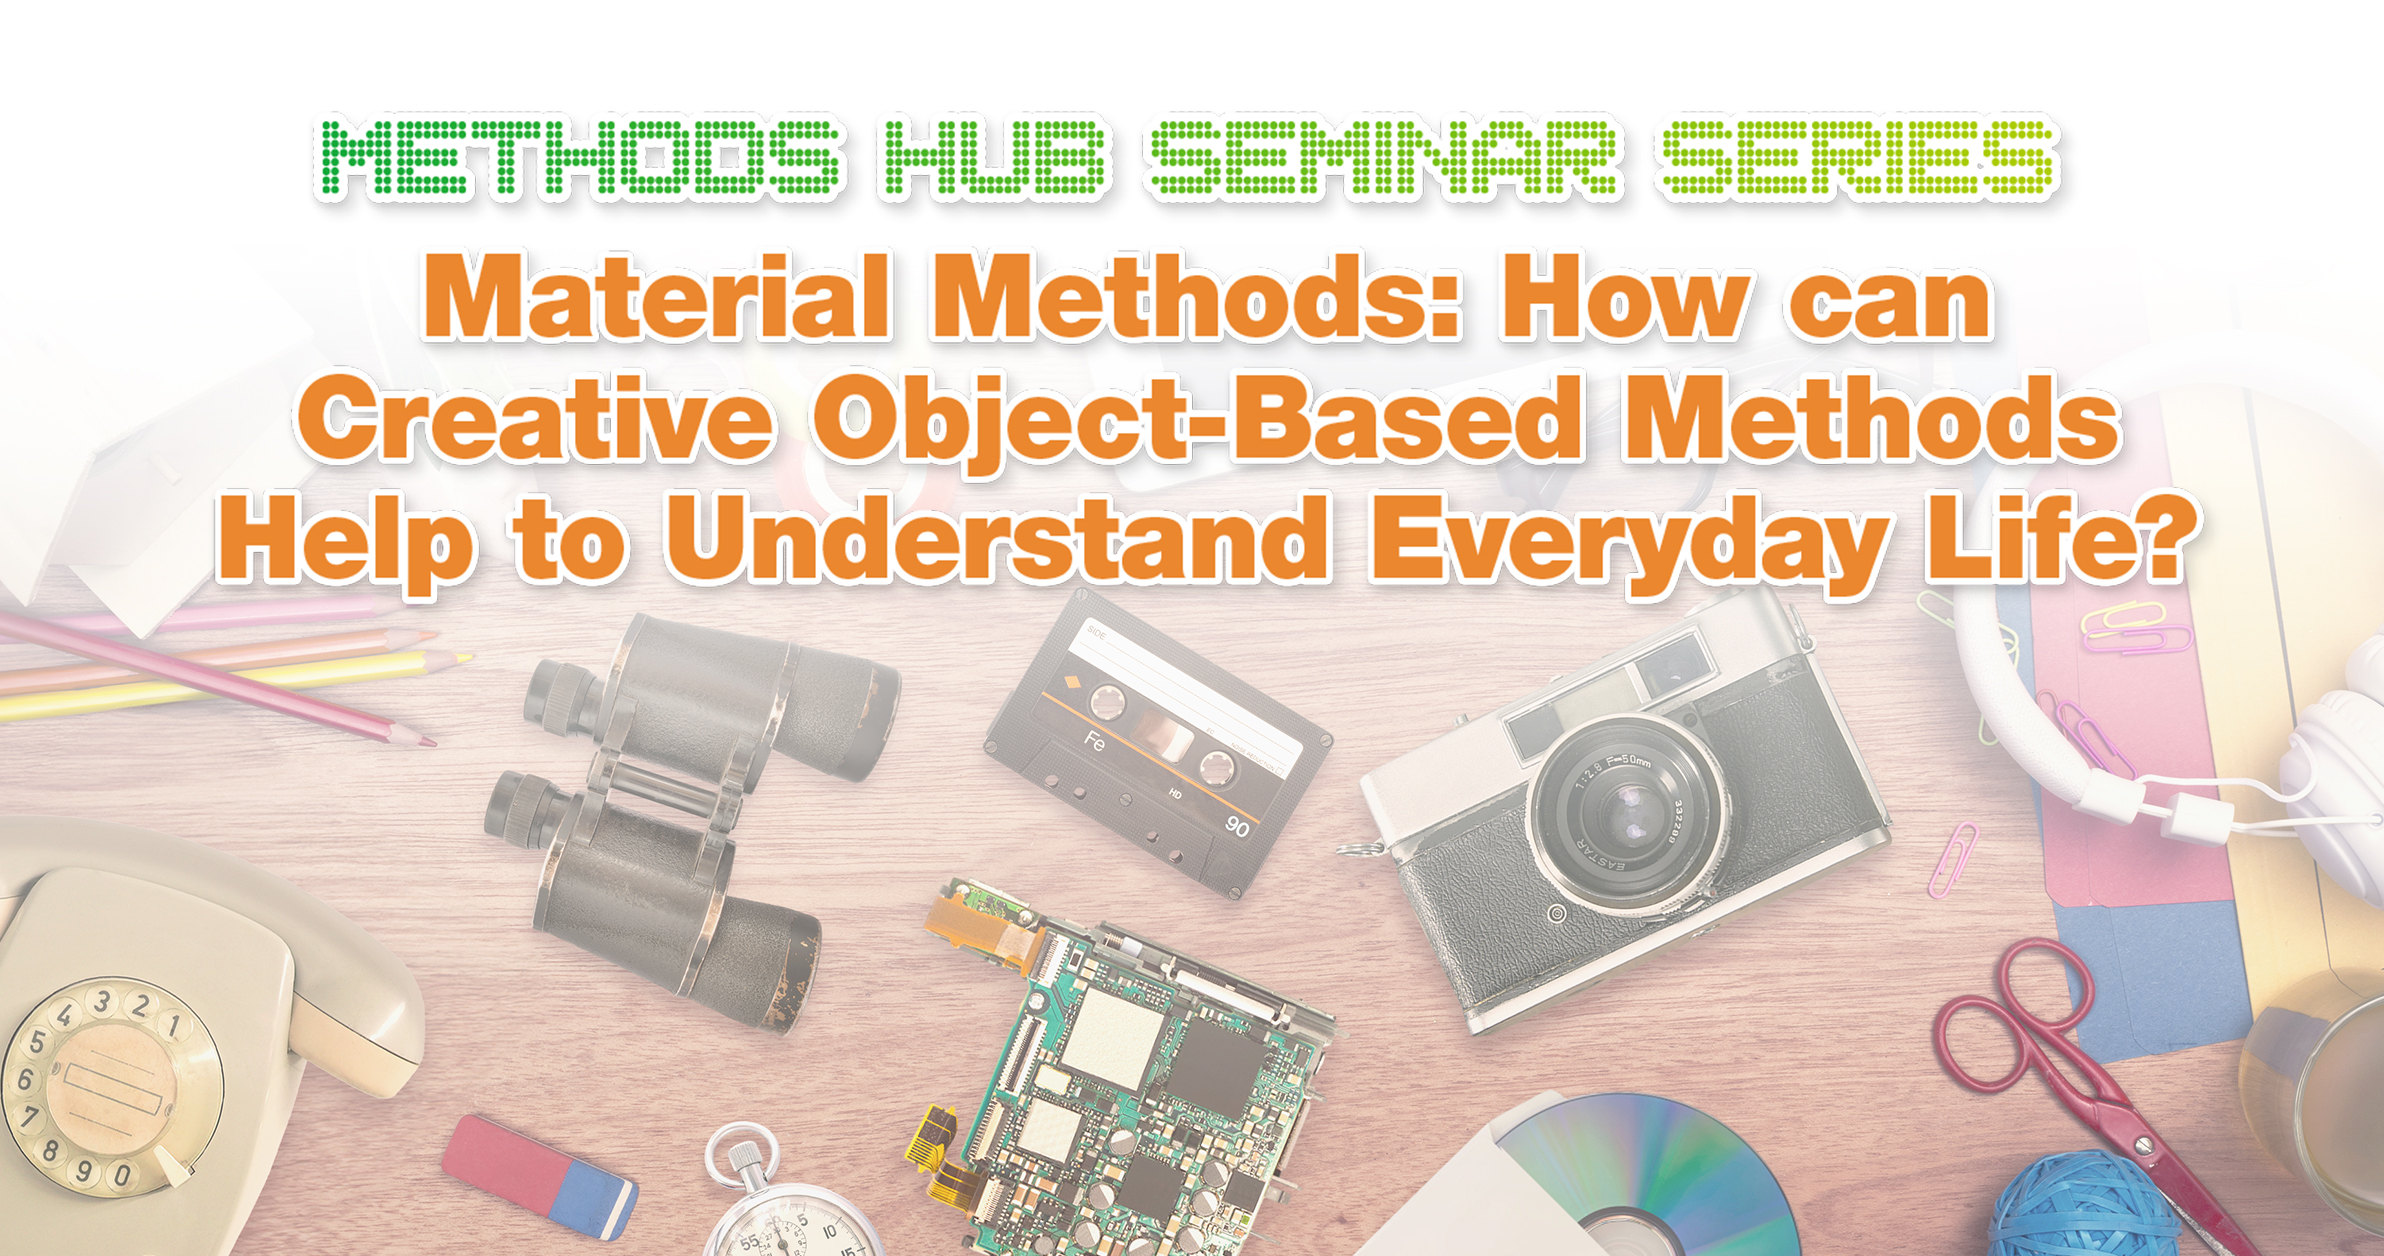 Methods Hub Seminar Series: Material Methods: How can Creative Object-Based Methods Help to Understand Everyday Life?